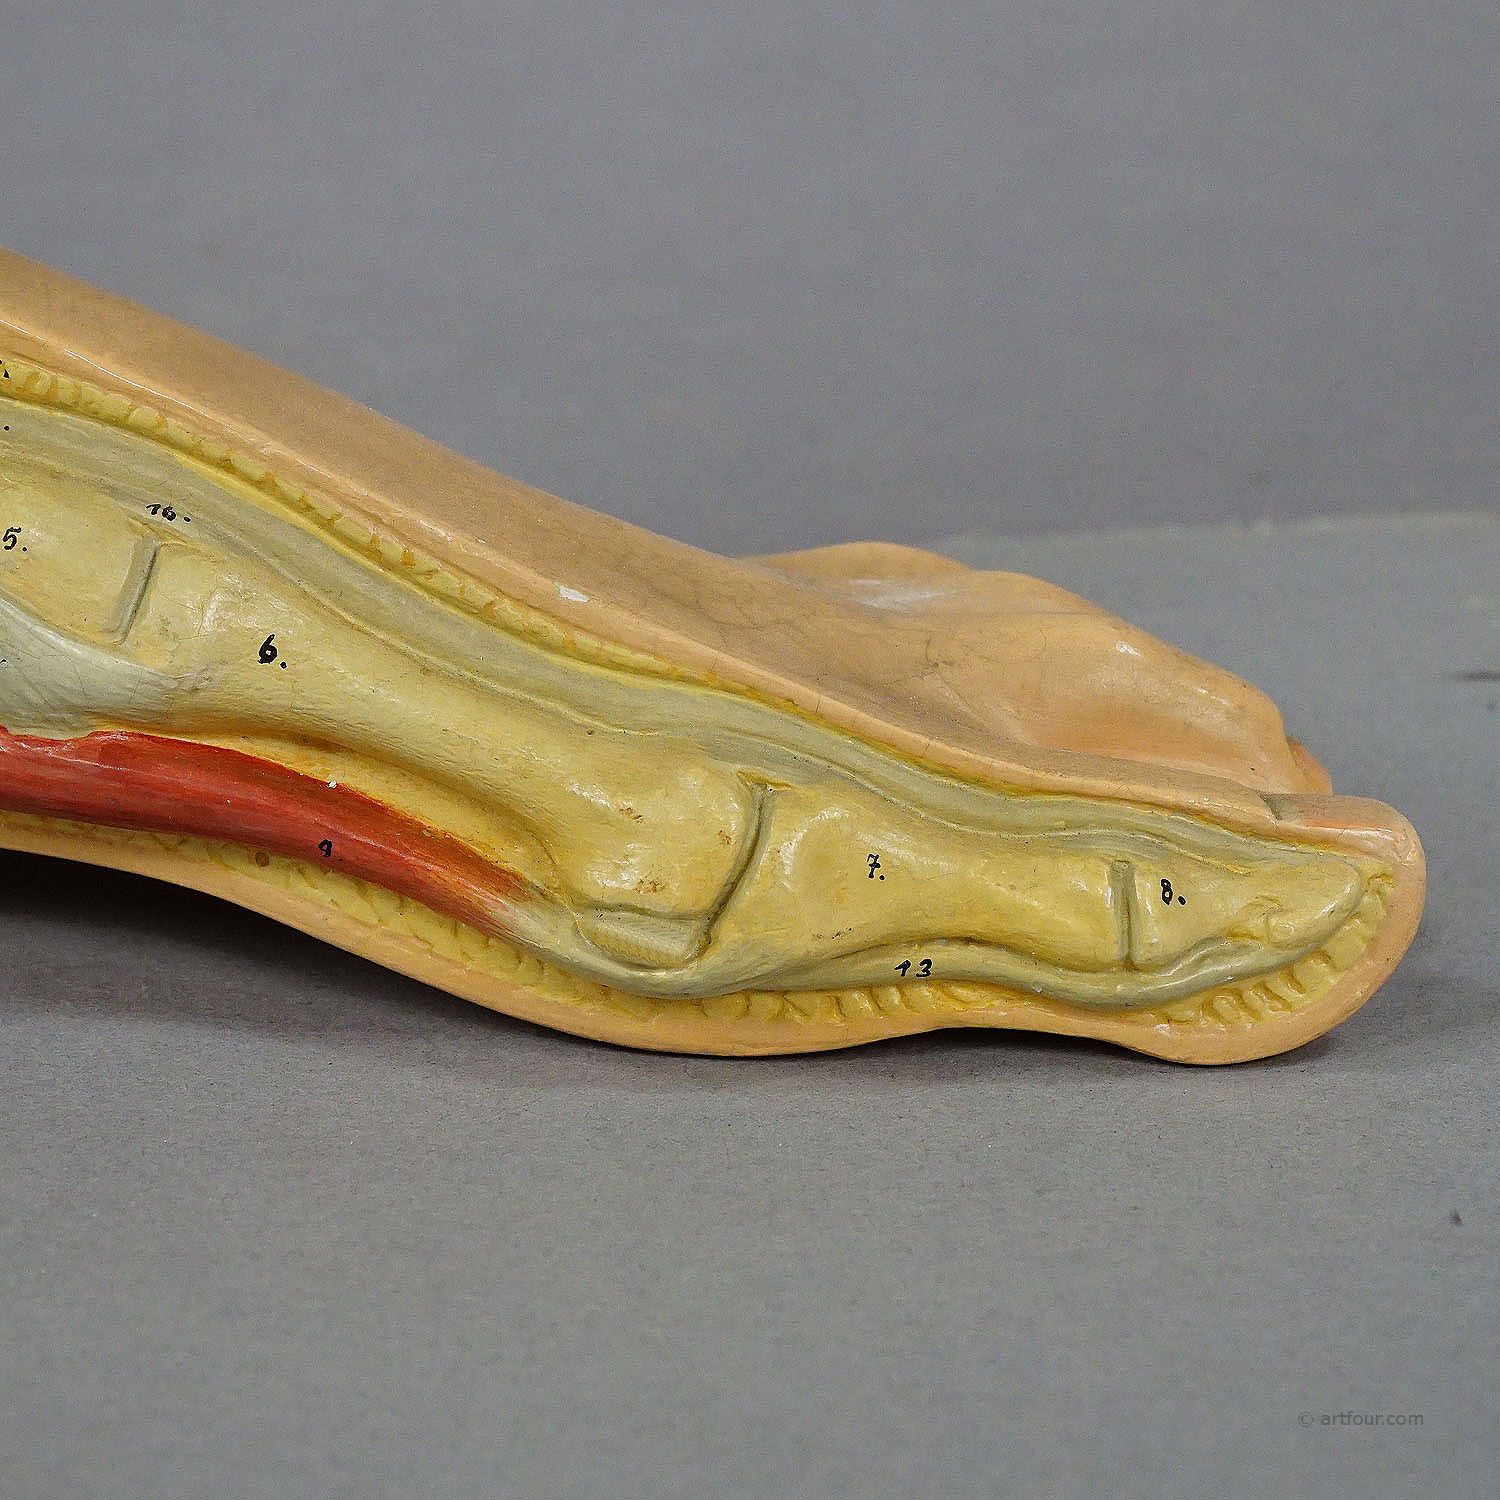 Antique 3D Anatomical Foot Model Made by SOMSO ca. 1930